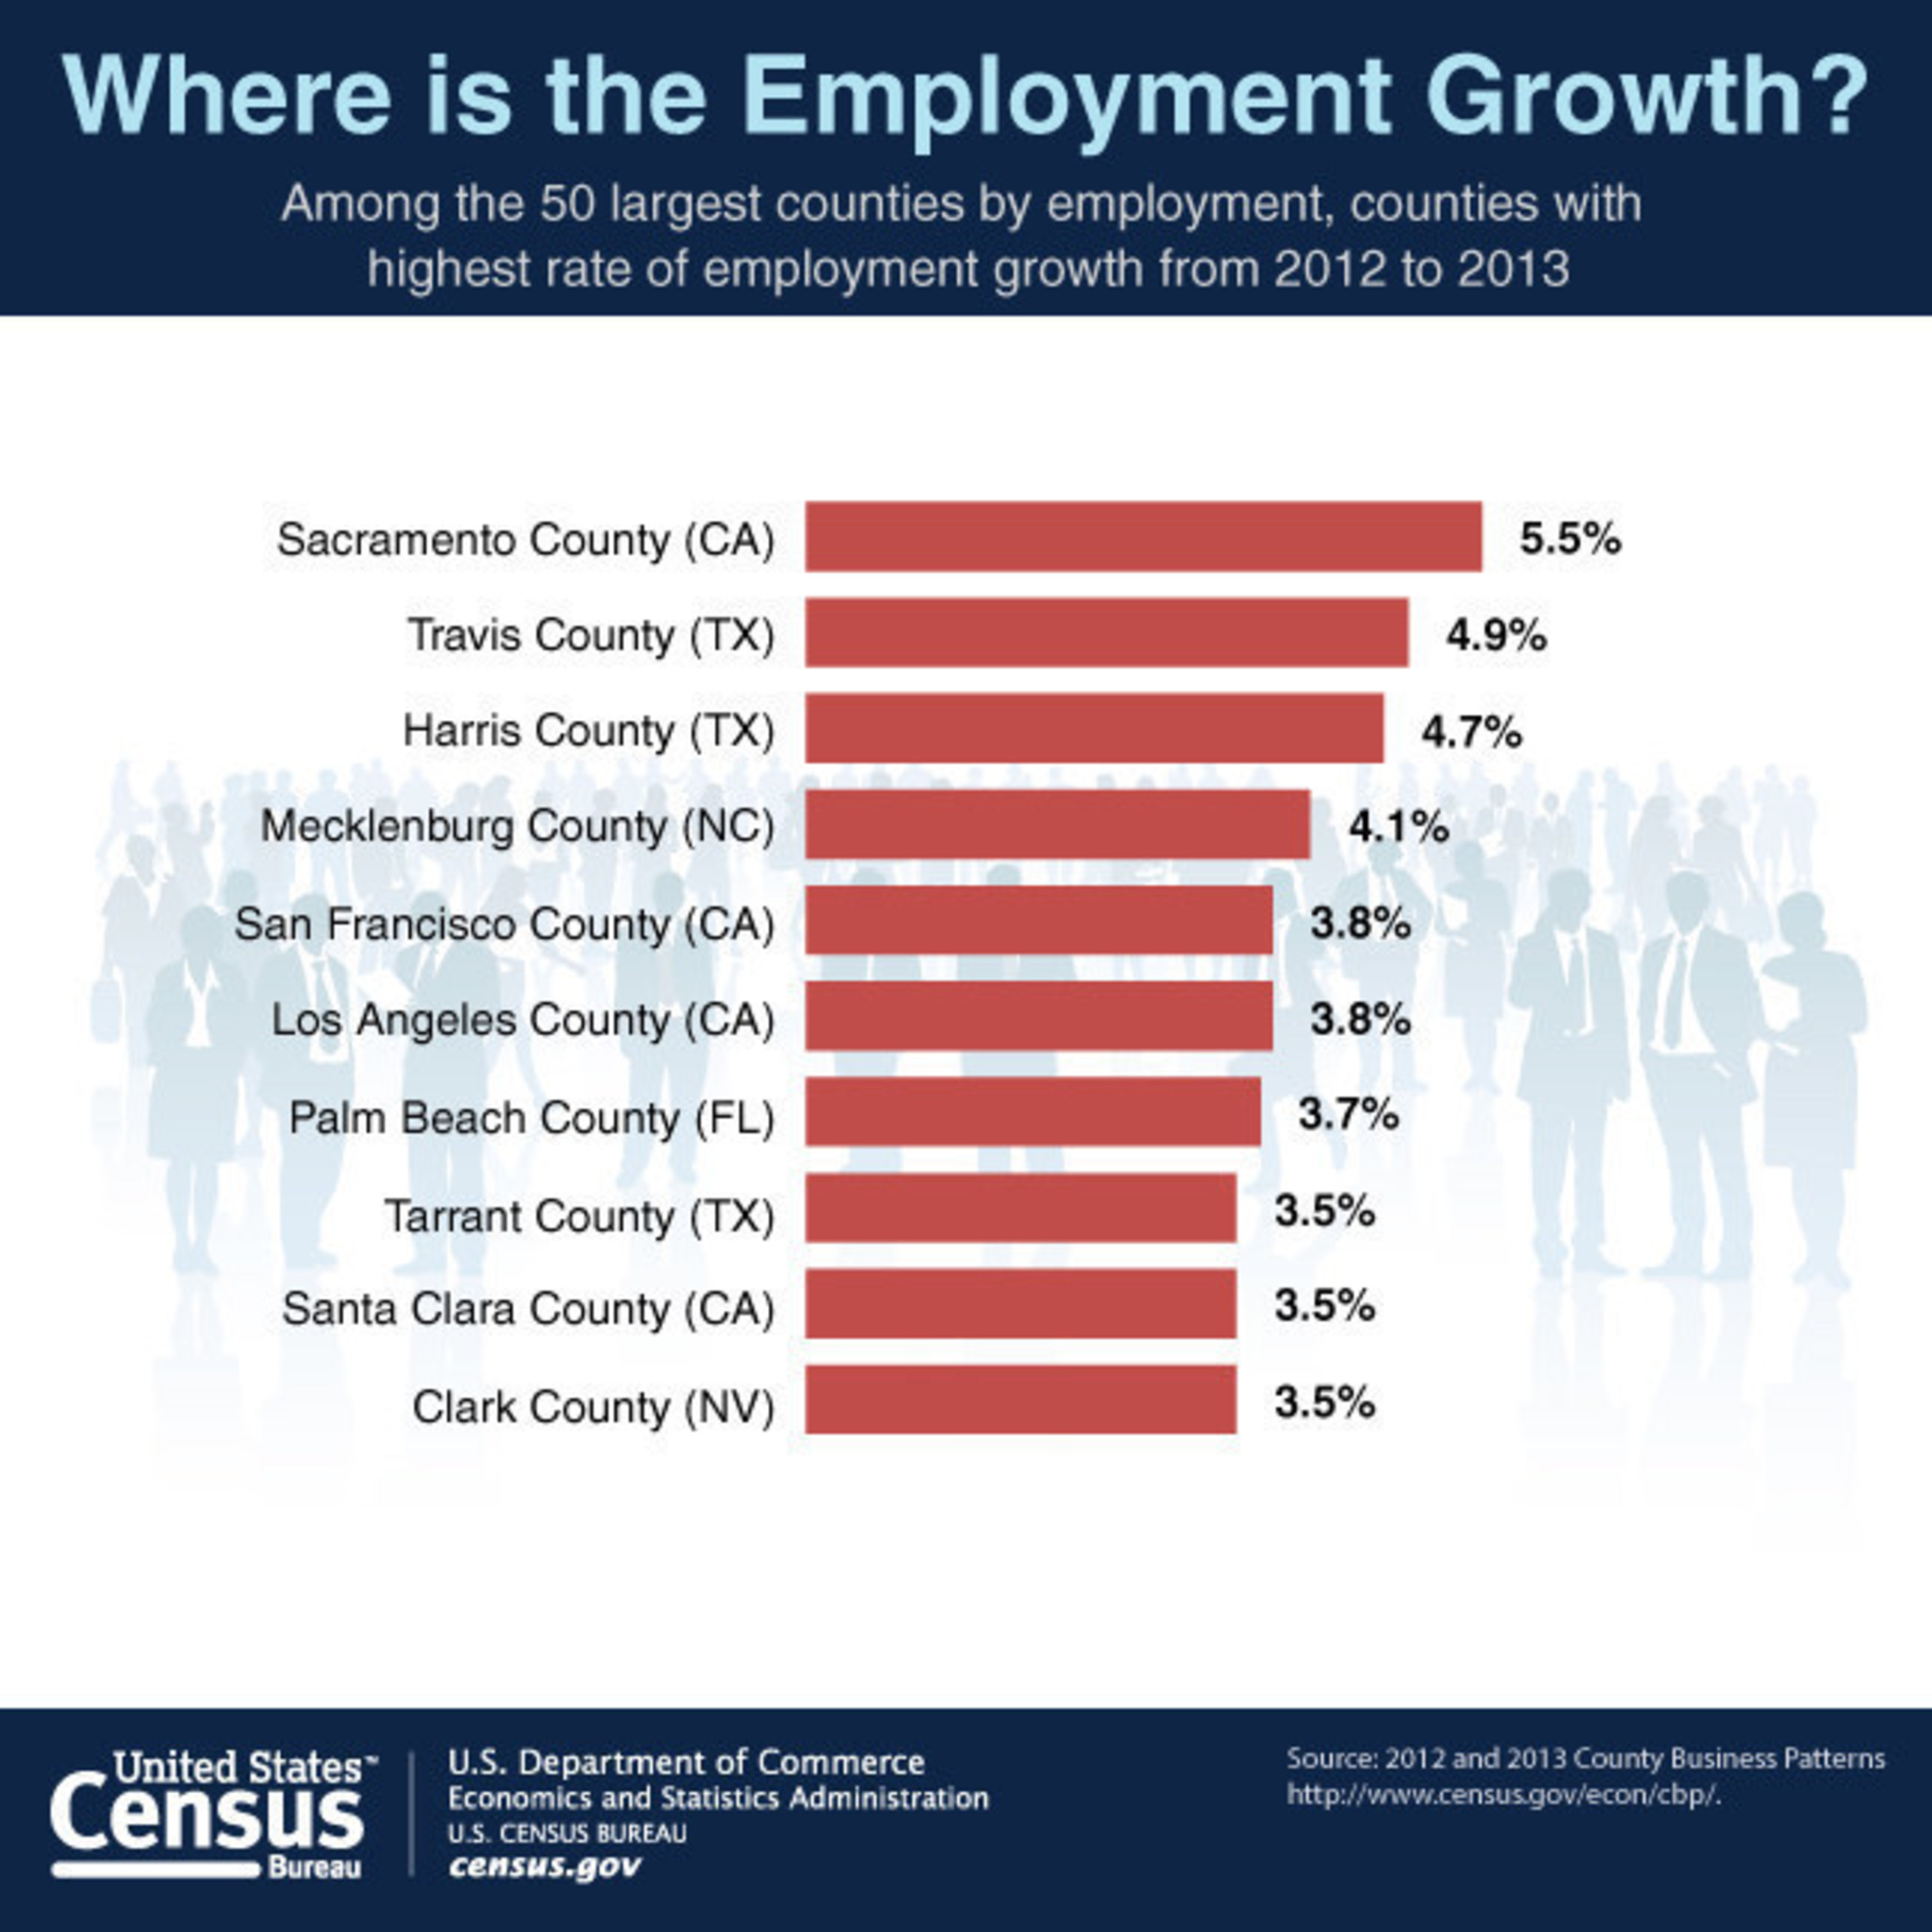 Among the 50 largest counties by employment, Sacramento, Calif., had the highest rate of employment growth from 2012 to 2013. Two Texas counties -- Travis and Harris -- followed.